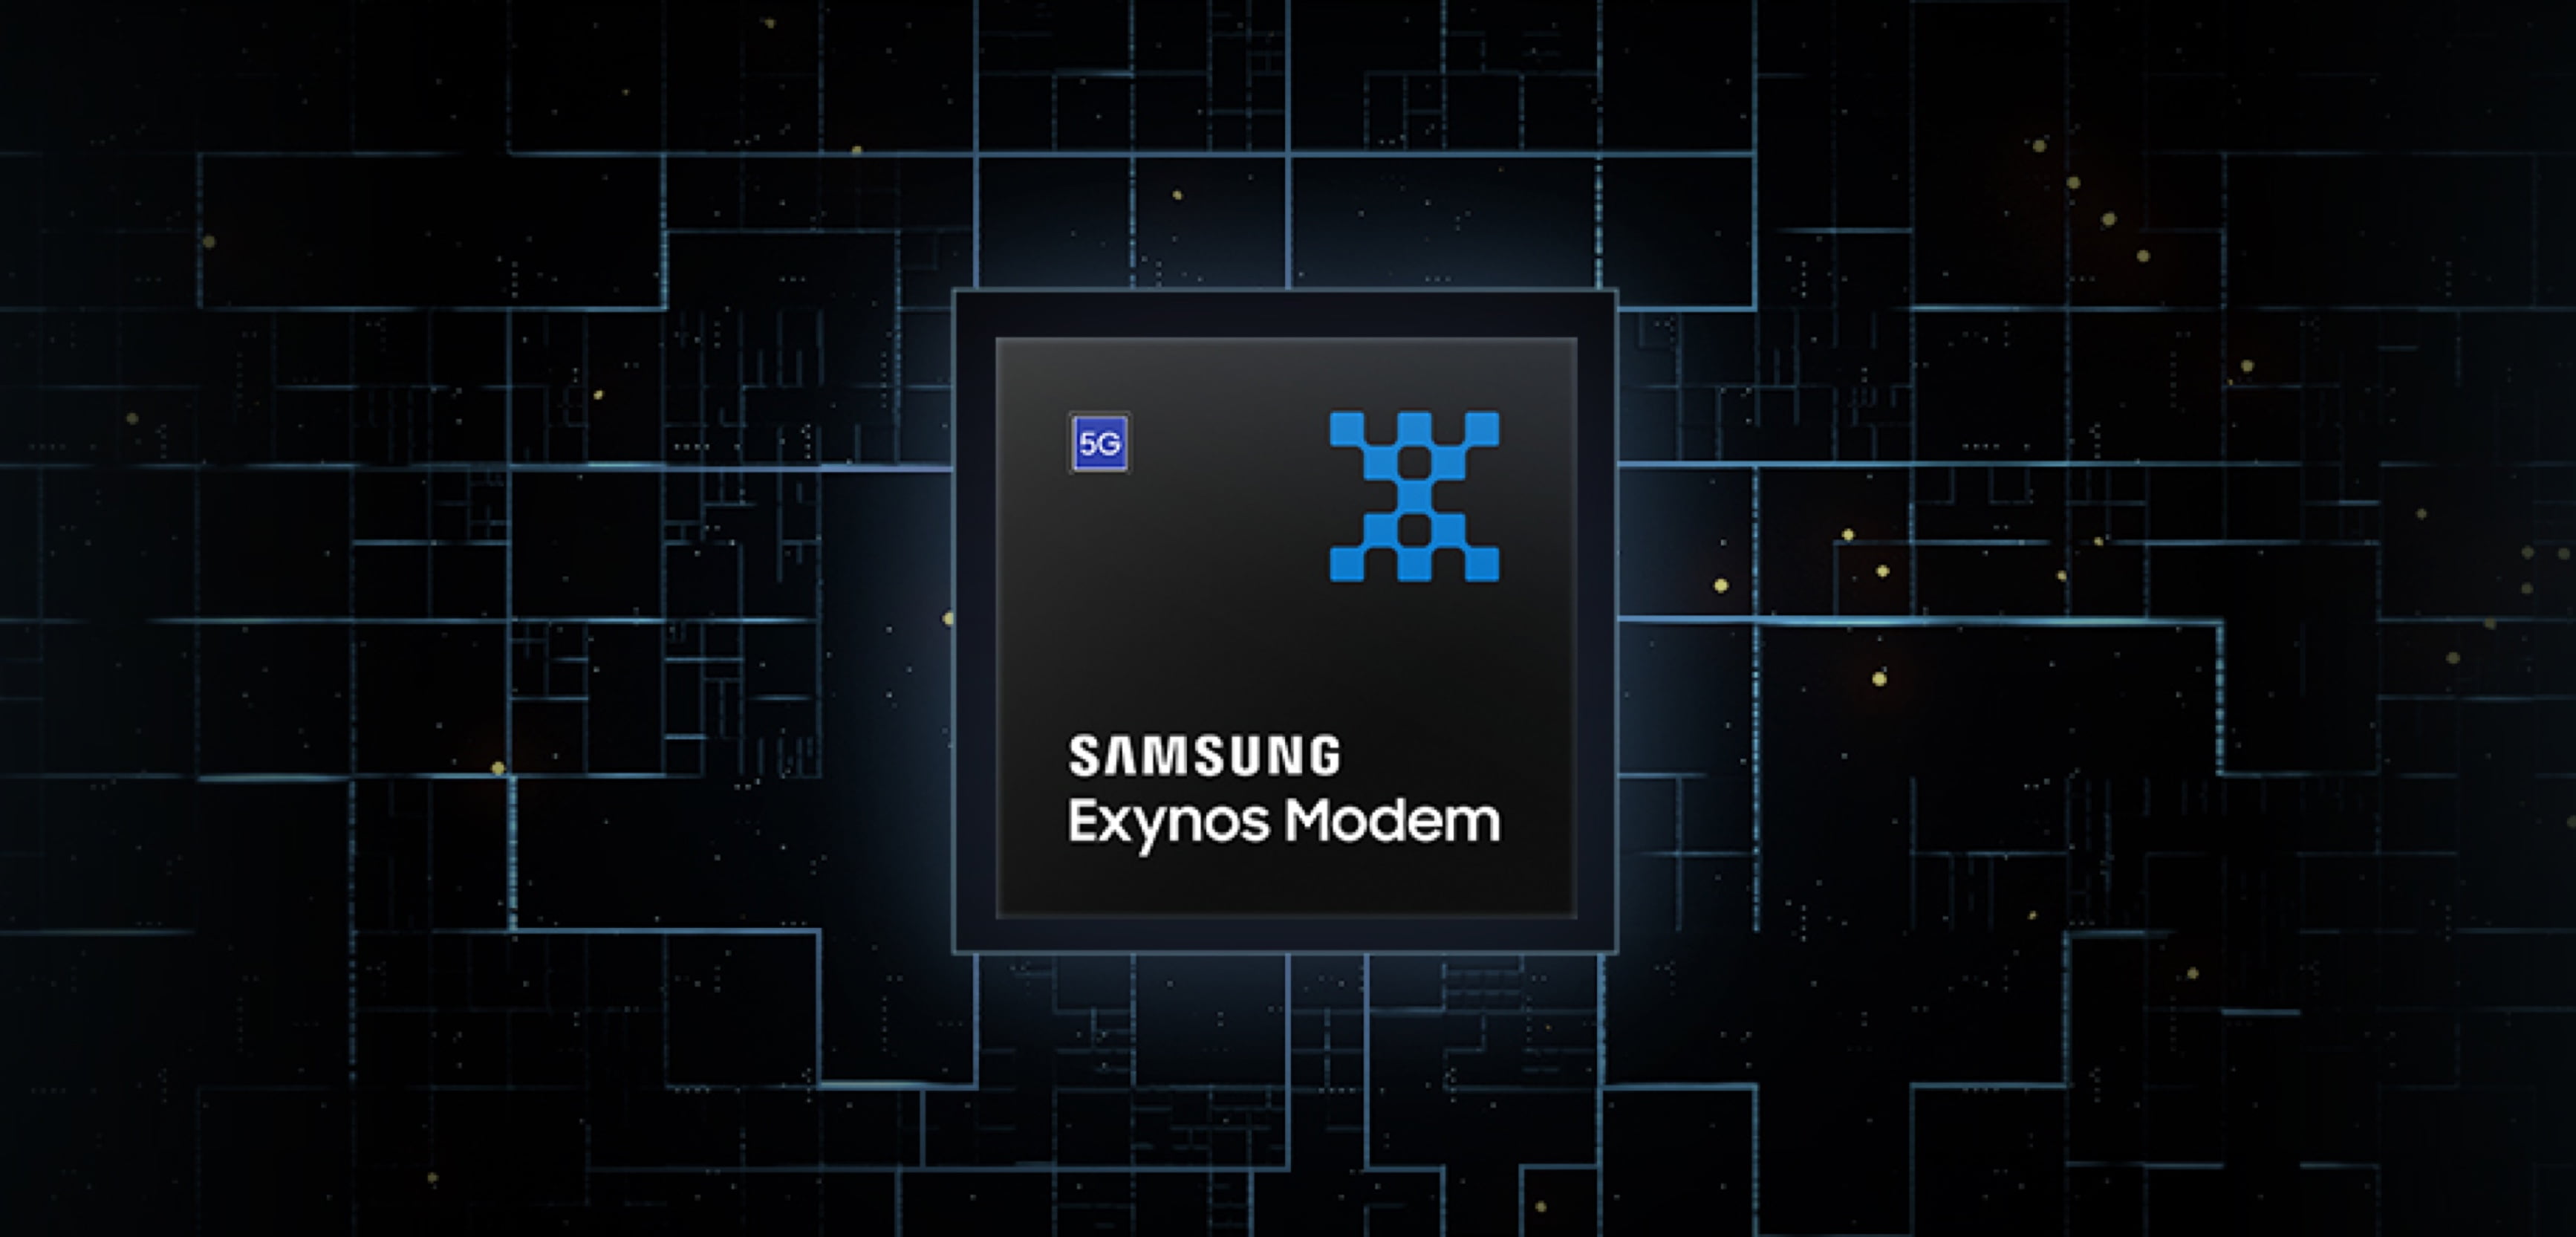 The Samsung Exynos Modem delivers network efficiency with support for mmWave and sub-6GHz spectrum bands, spanning 2G to 4G LTE.